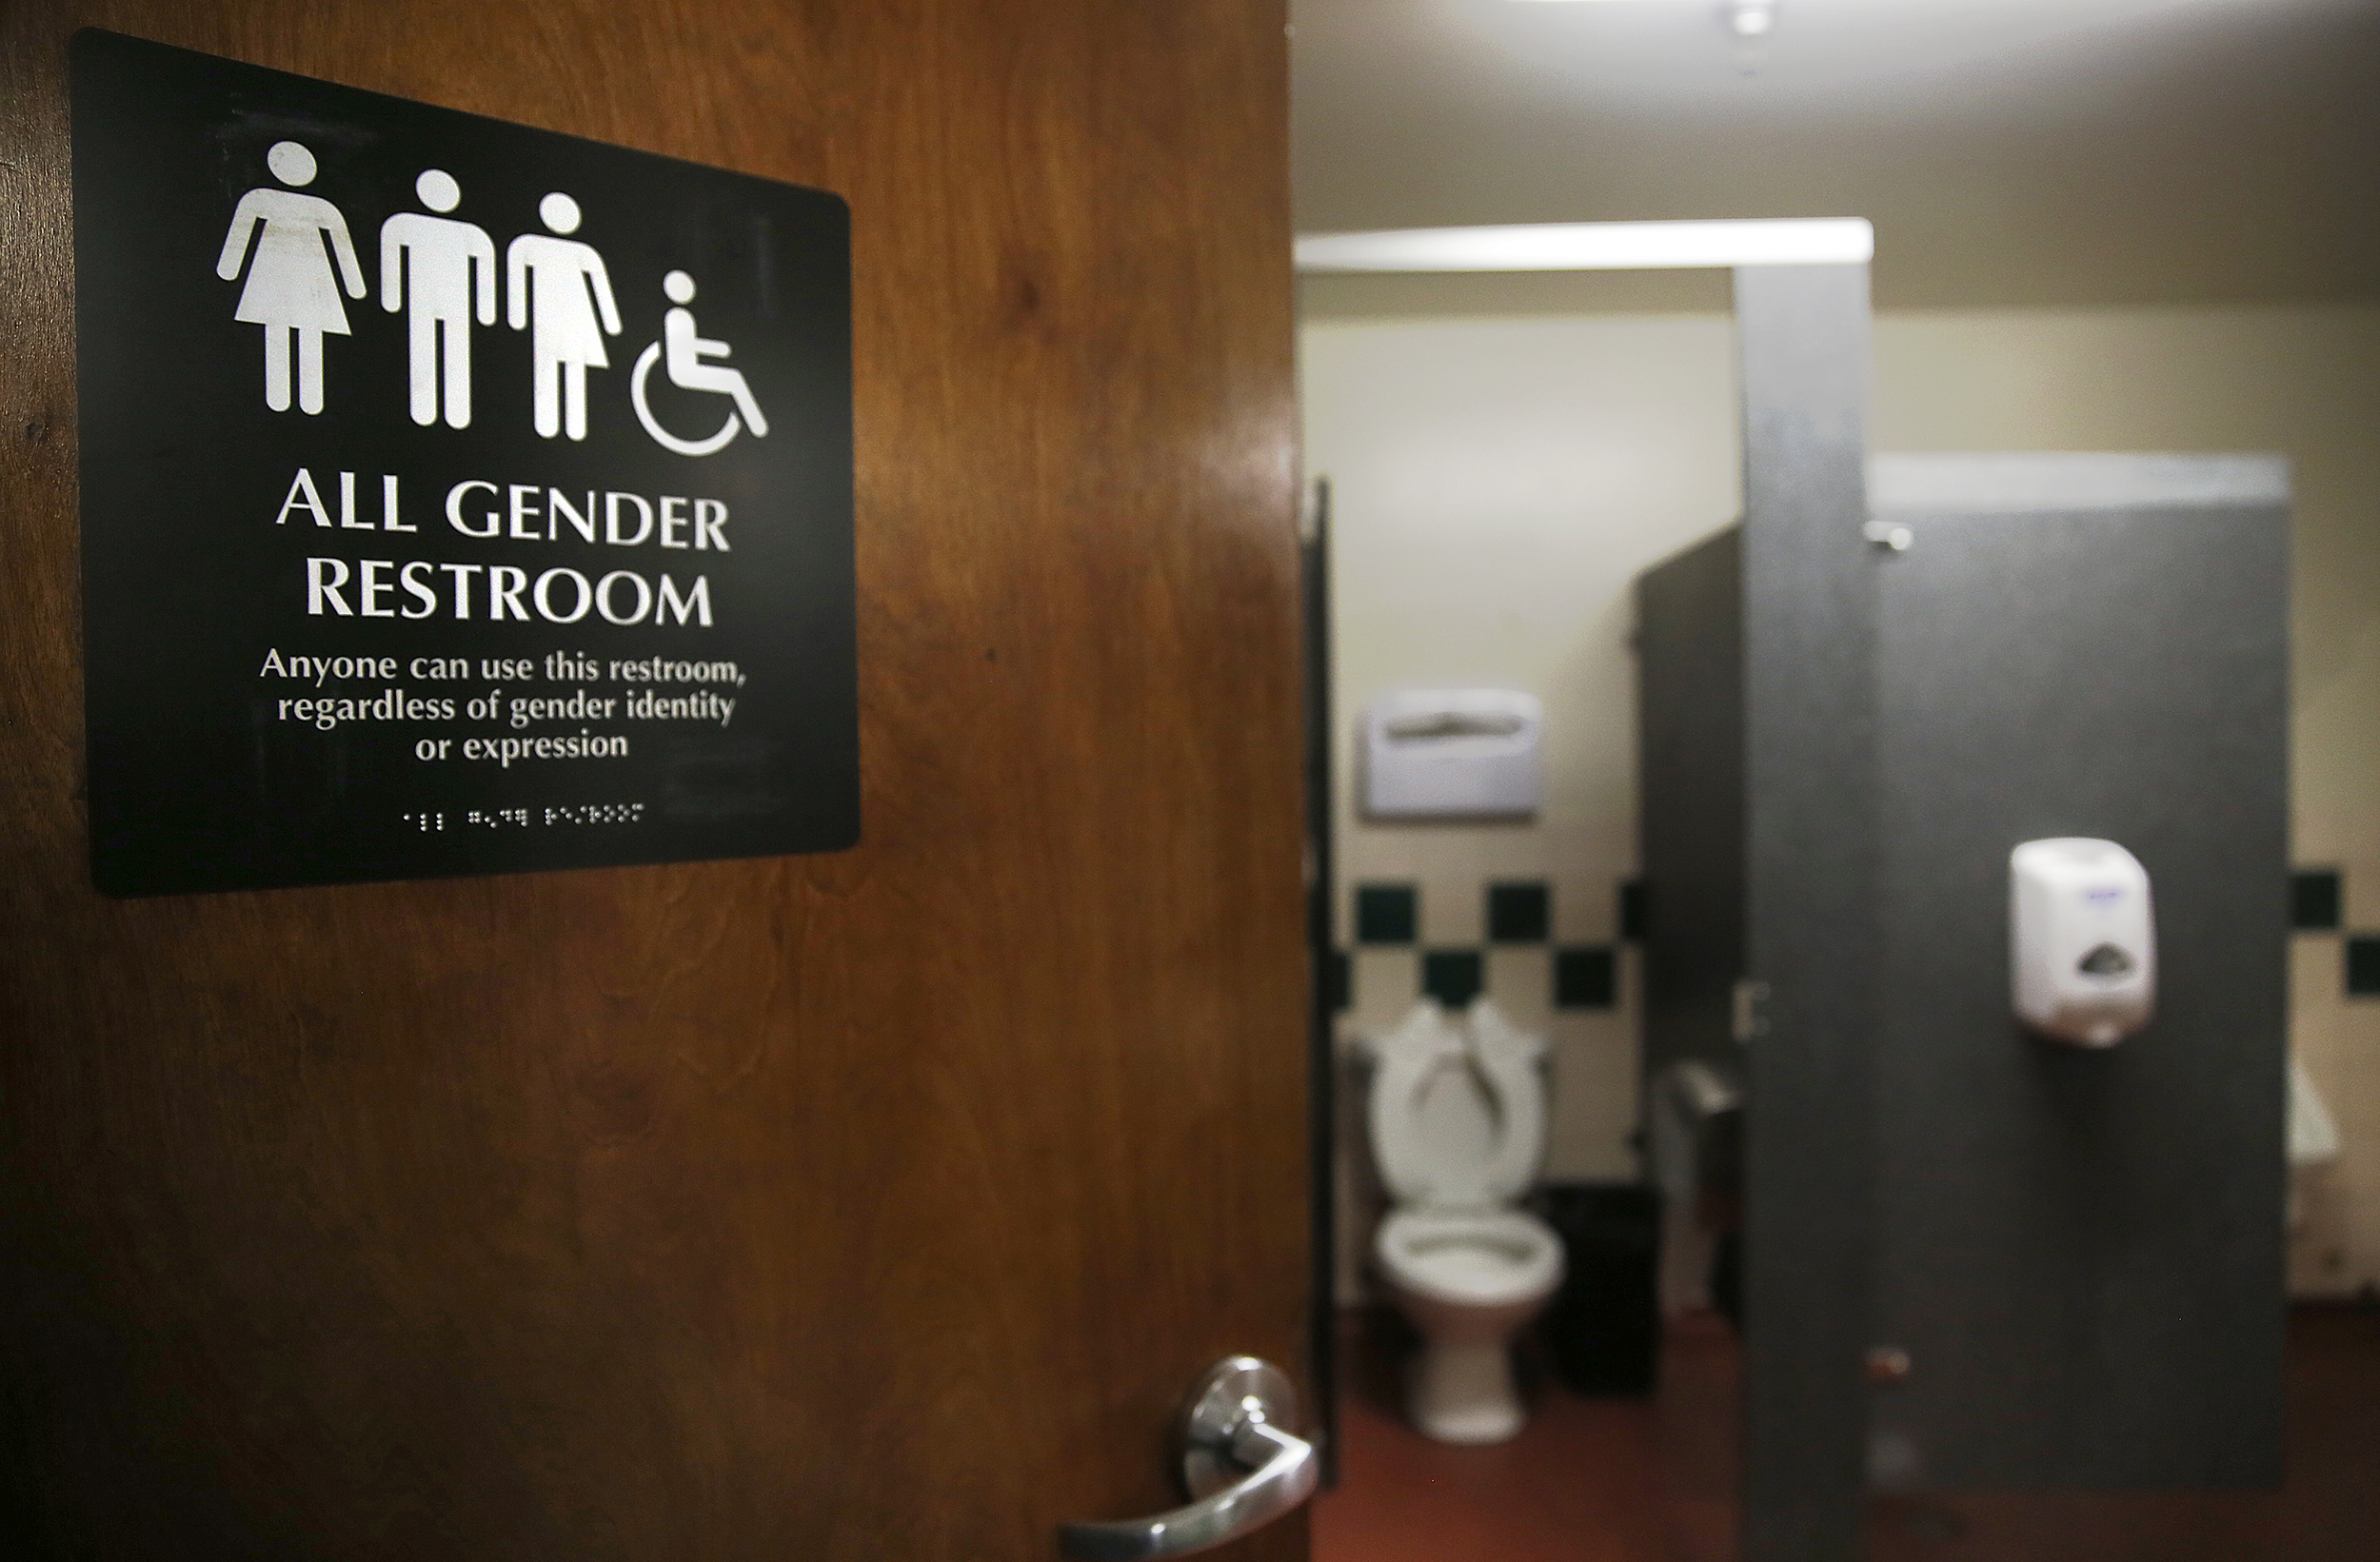 Multiple toilets at SOMArts Cultural Center have all gender restroom access in San Francisco, California, on Friday,  January 8, 2015.  Next Tuesday supervisor David Campos will introduce legislation that requires the city to make all single-room bathroom